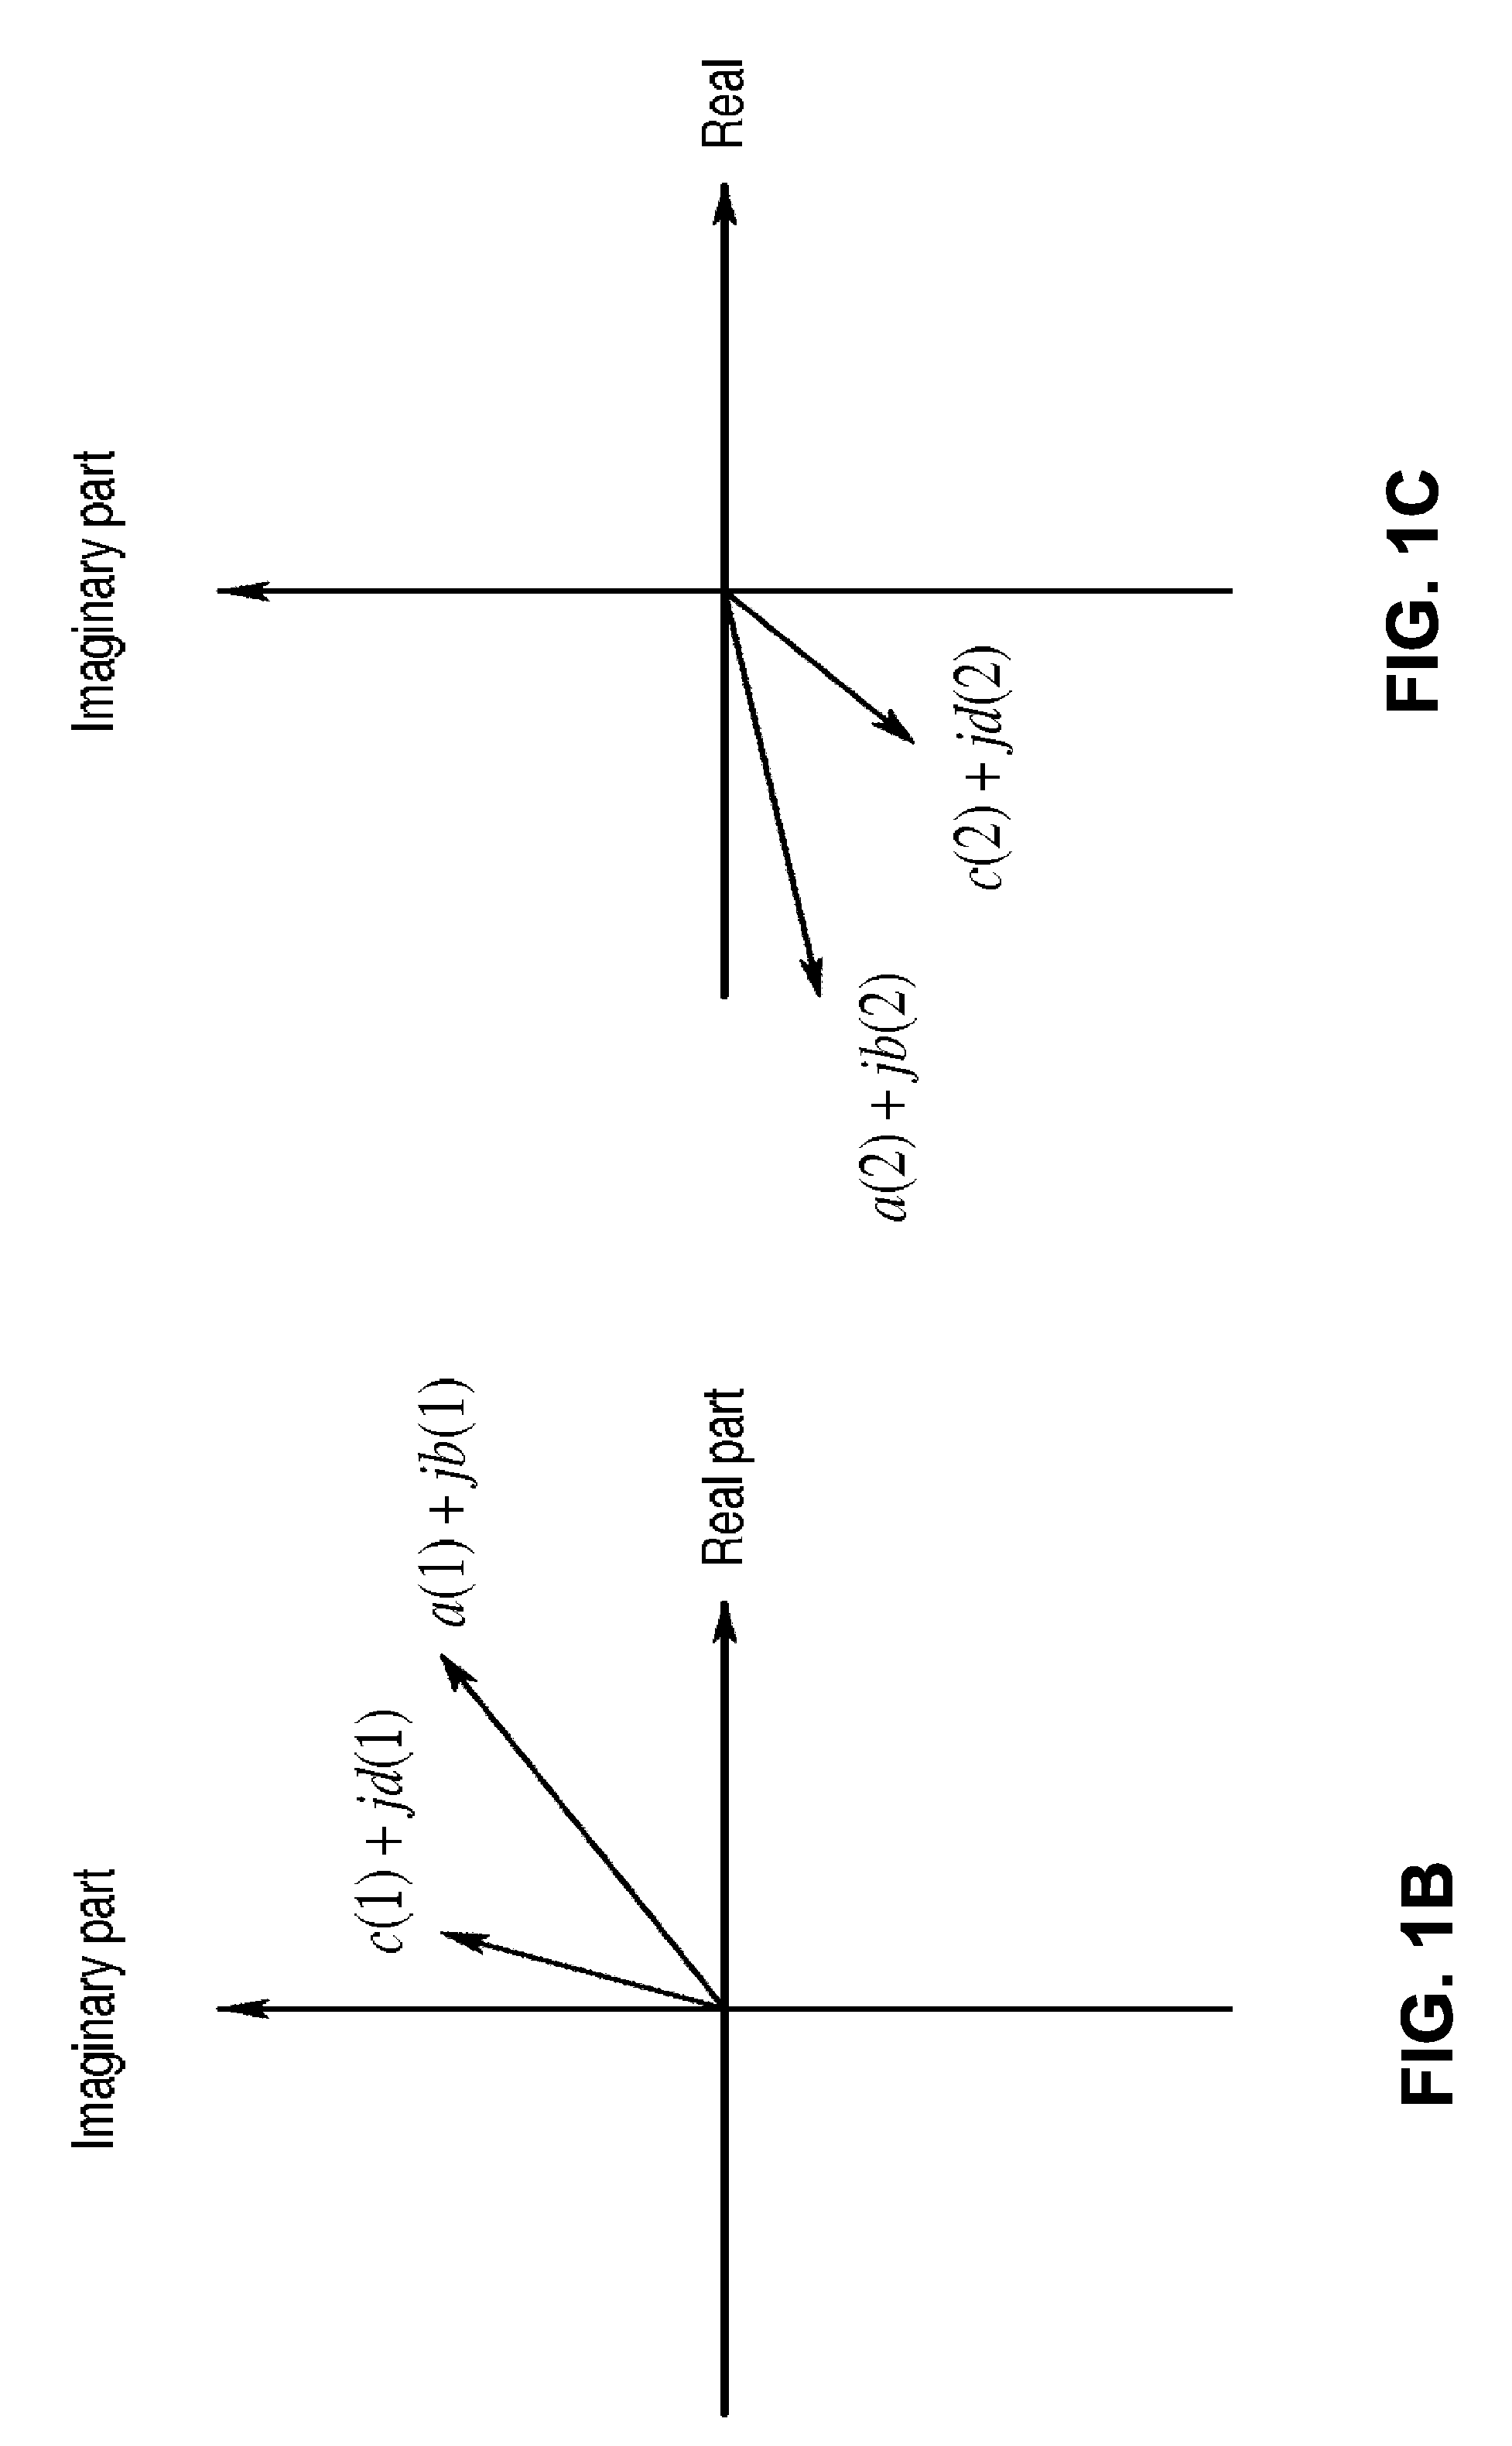 System, method, and apparatus for monitoring power